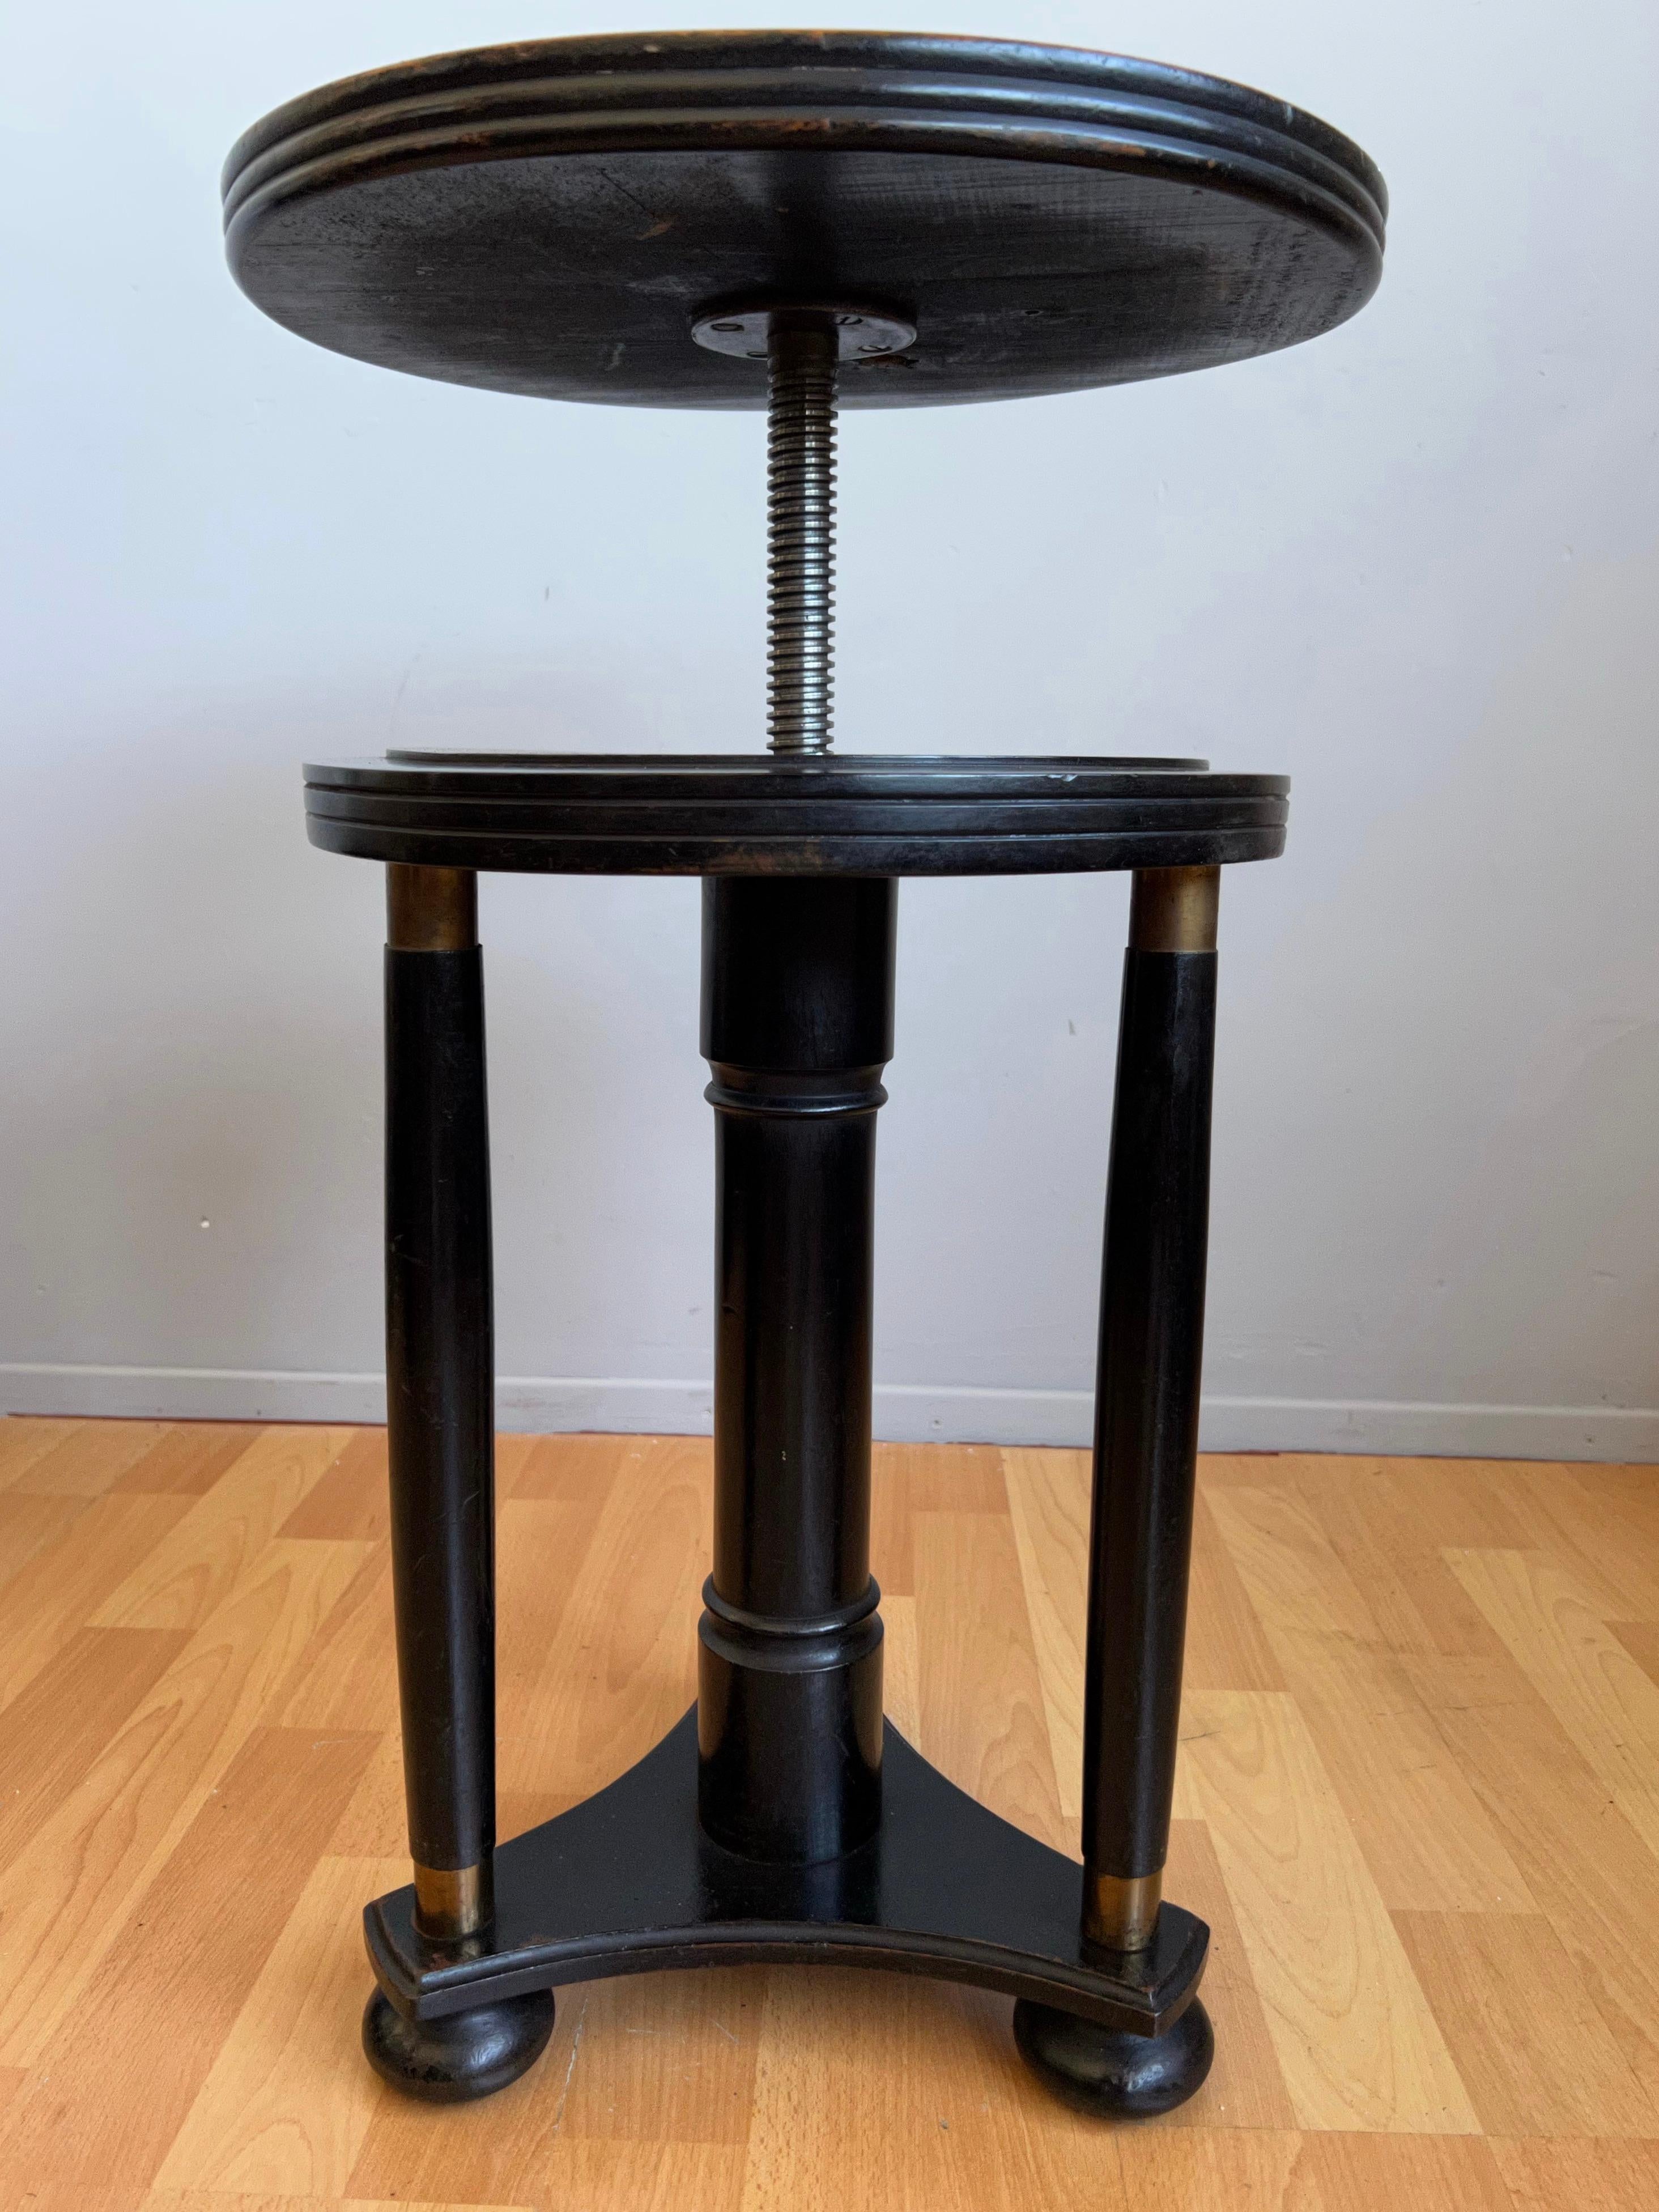 Vienna Secession Stylish Blackened Wooden and Brass Art Deco Desk or Piano Swivel Stool, ca 1900 For Sale